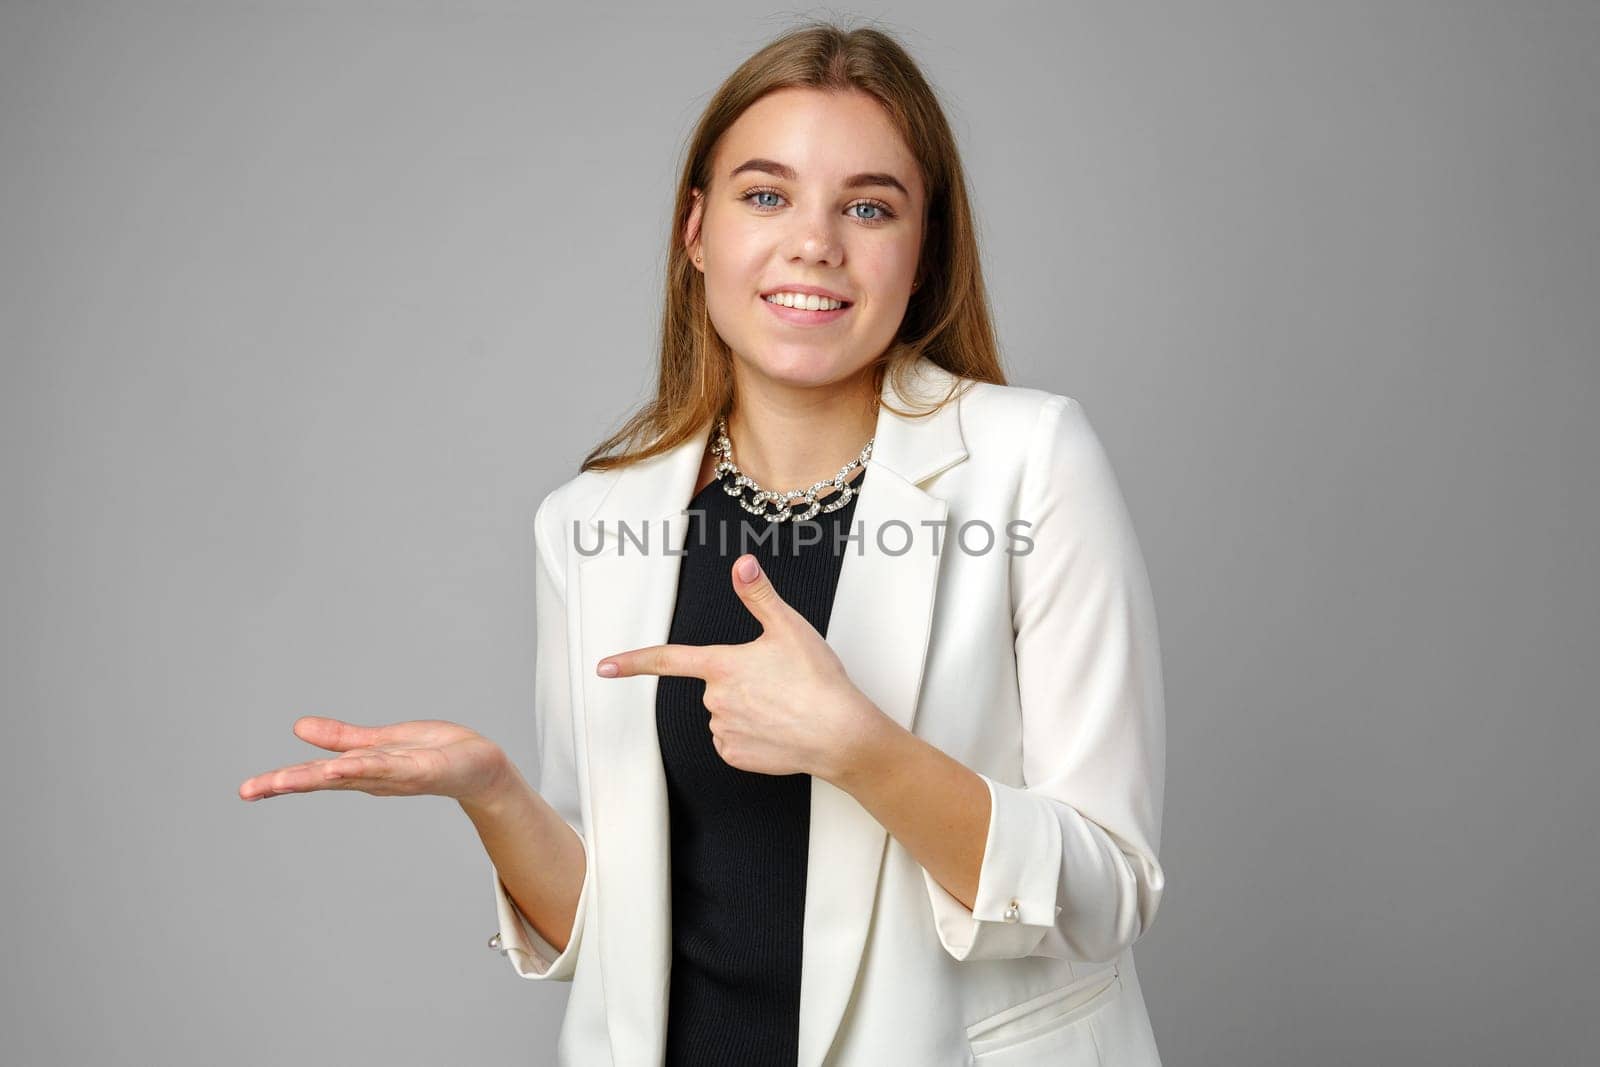 Confident Young Businesswoman Presenting With Hand Gesture in Studio Setting by Fabrikasimf